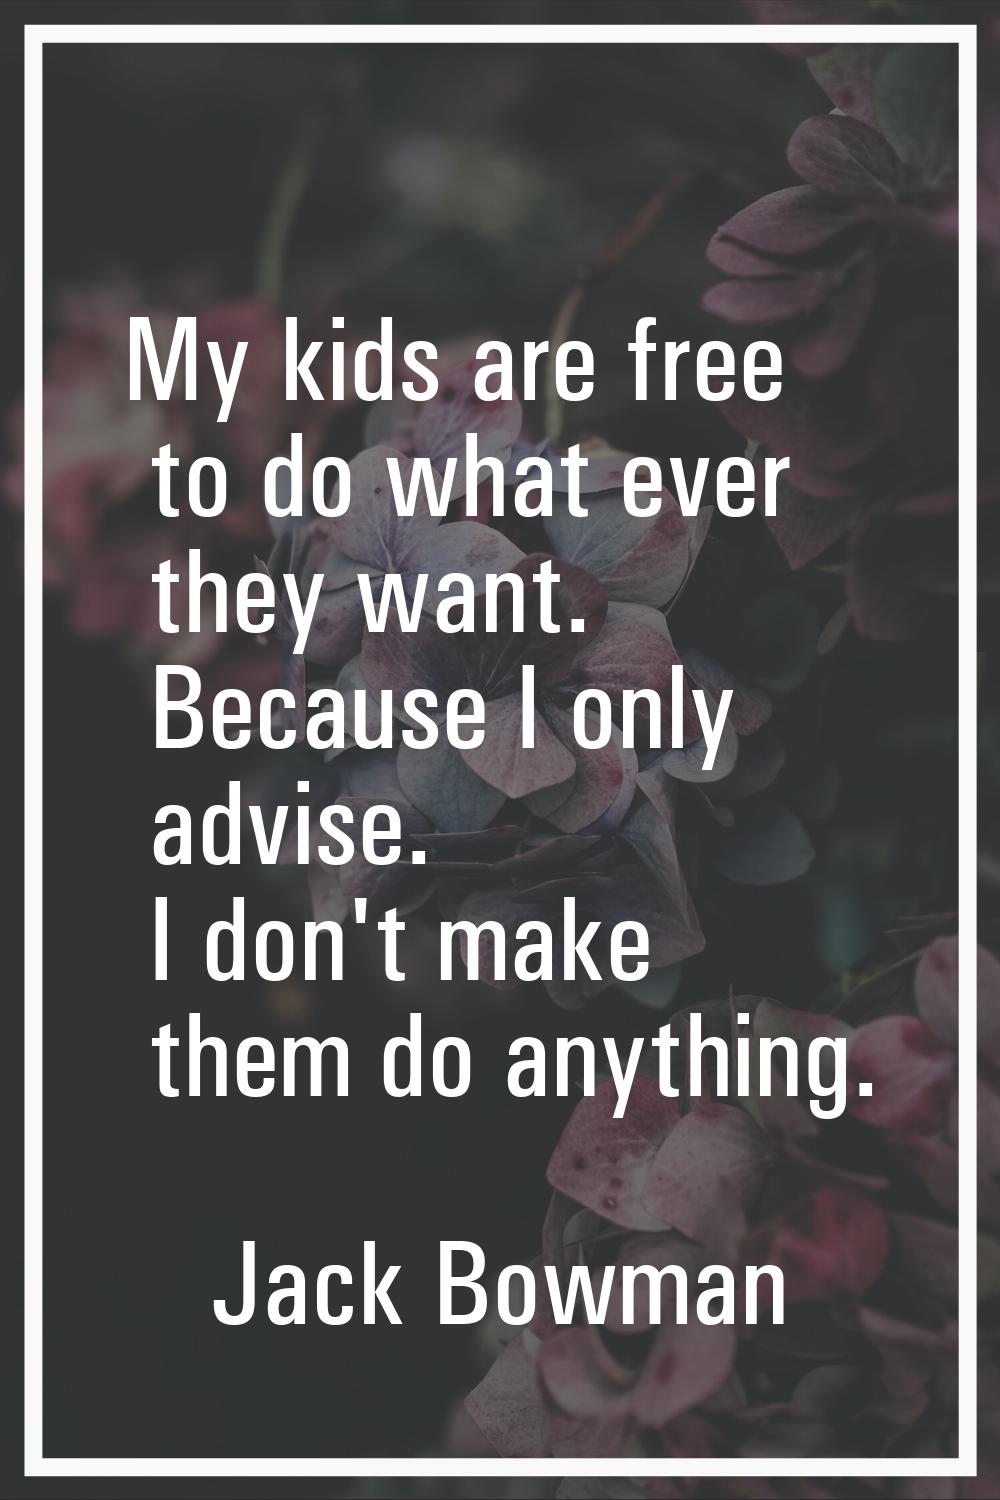 My kids are free to do what ever they want. Because I only advise. I don't make them do anything.